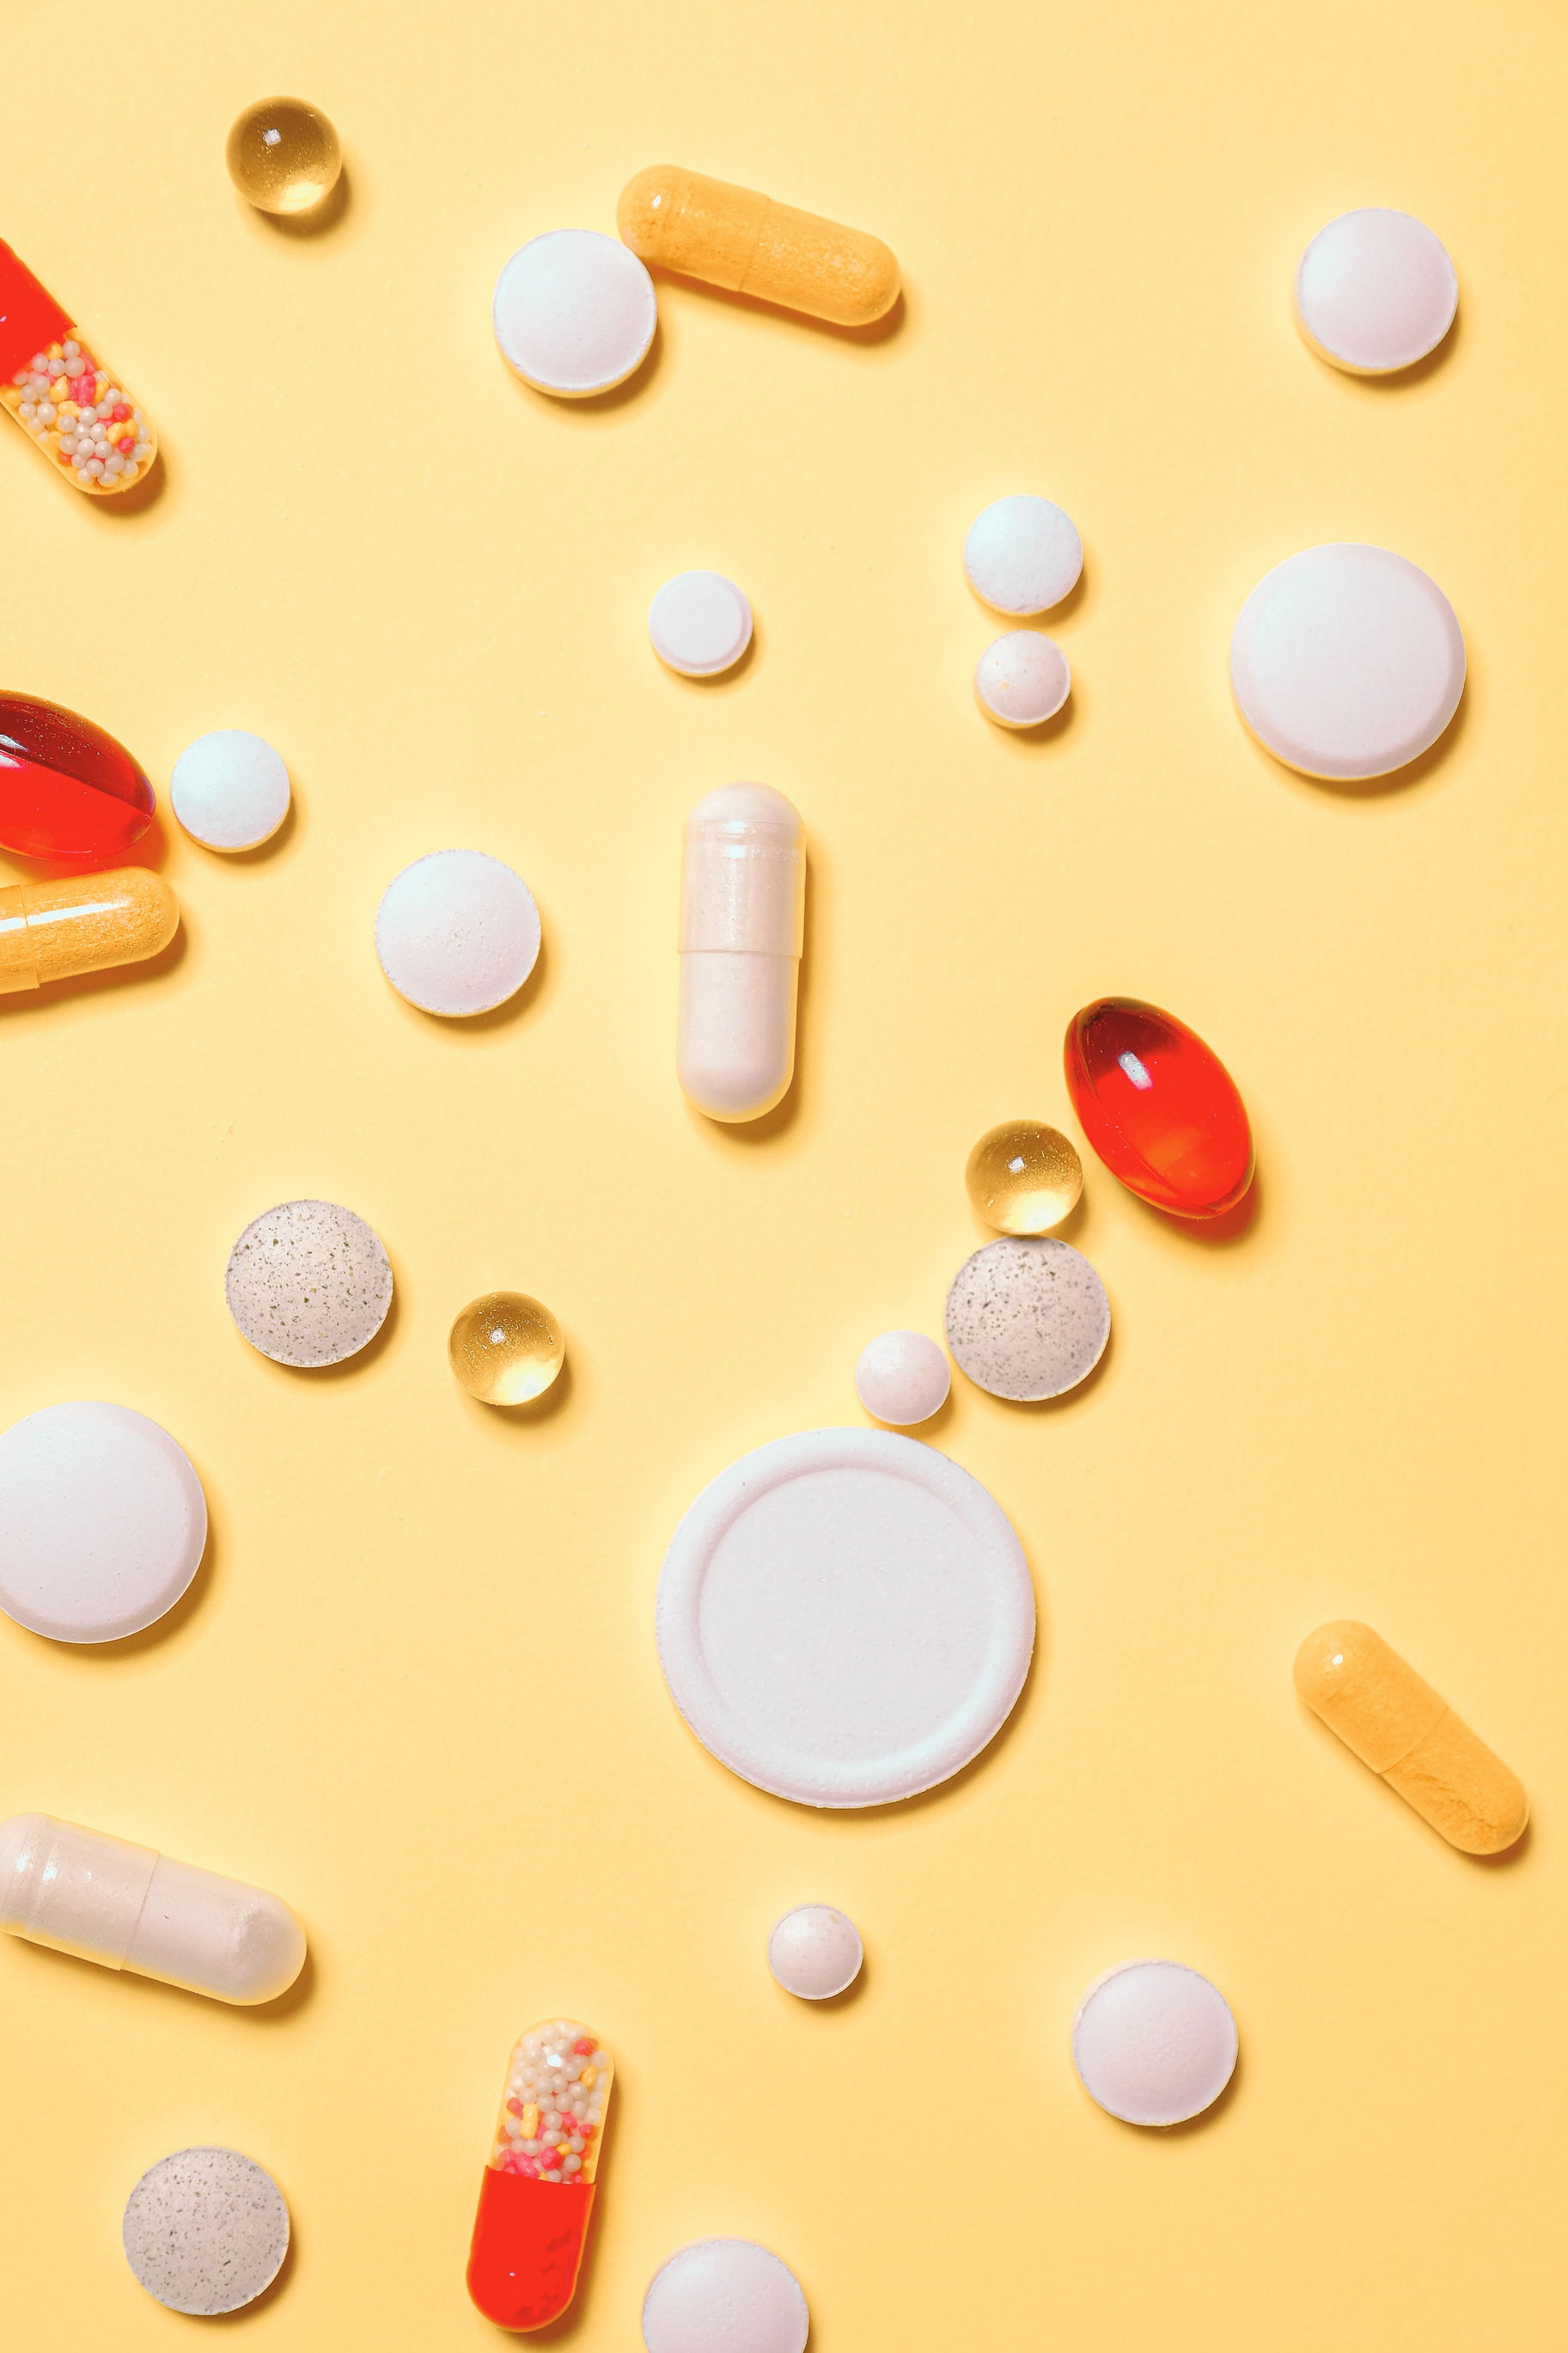 Are Weight Loss Medications Effective? A Dietitian Explains